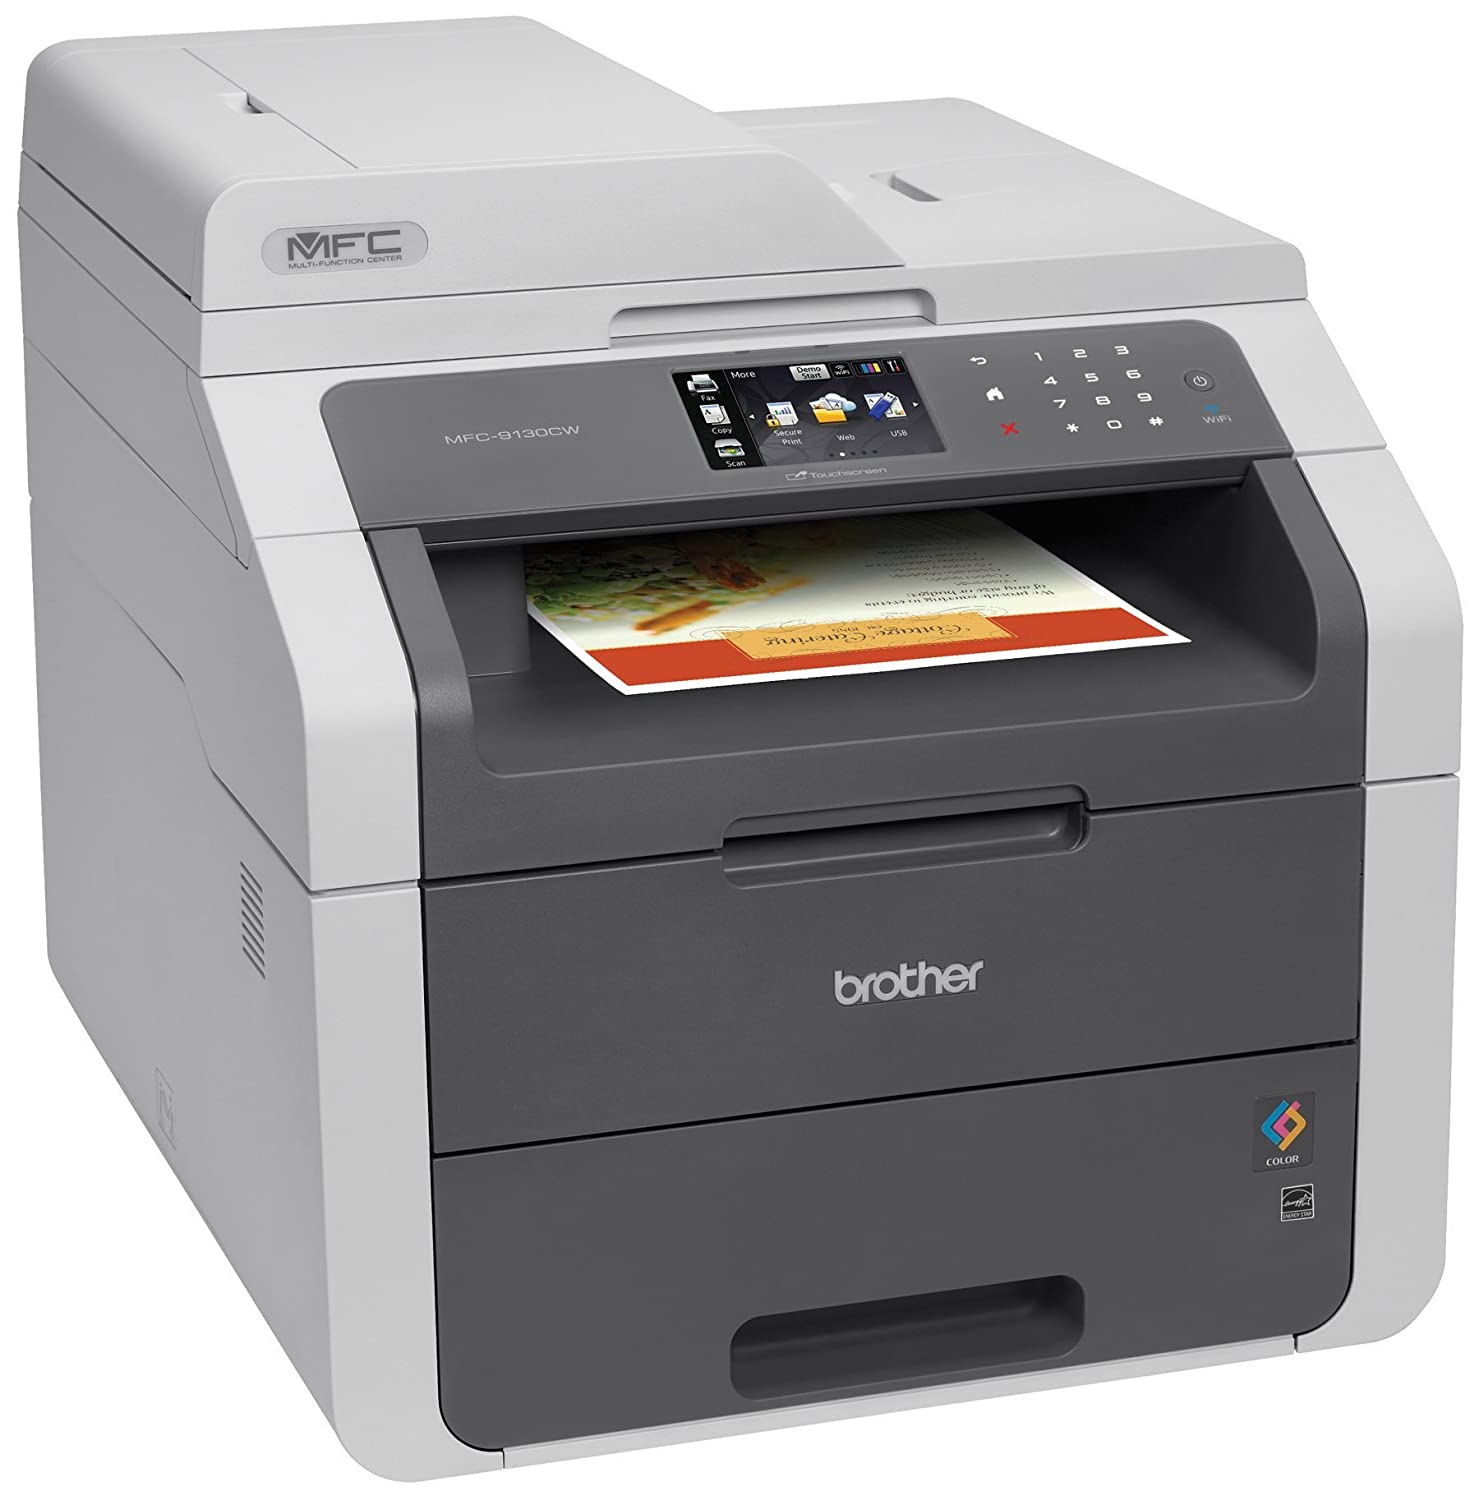 Brother Mfc 9340cdw Scanner Software Mac